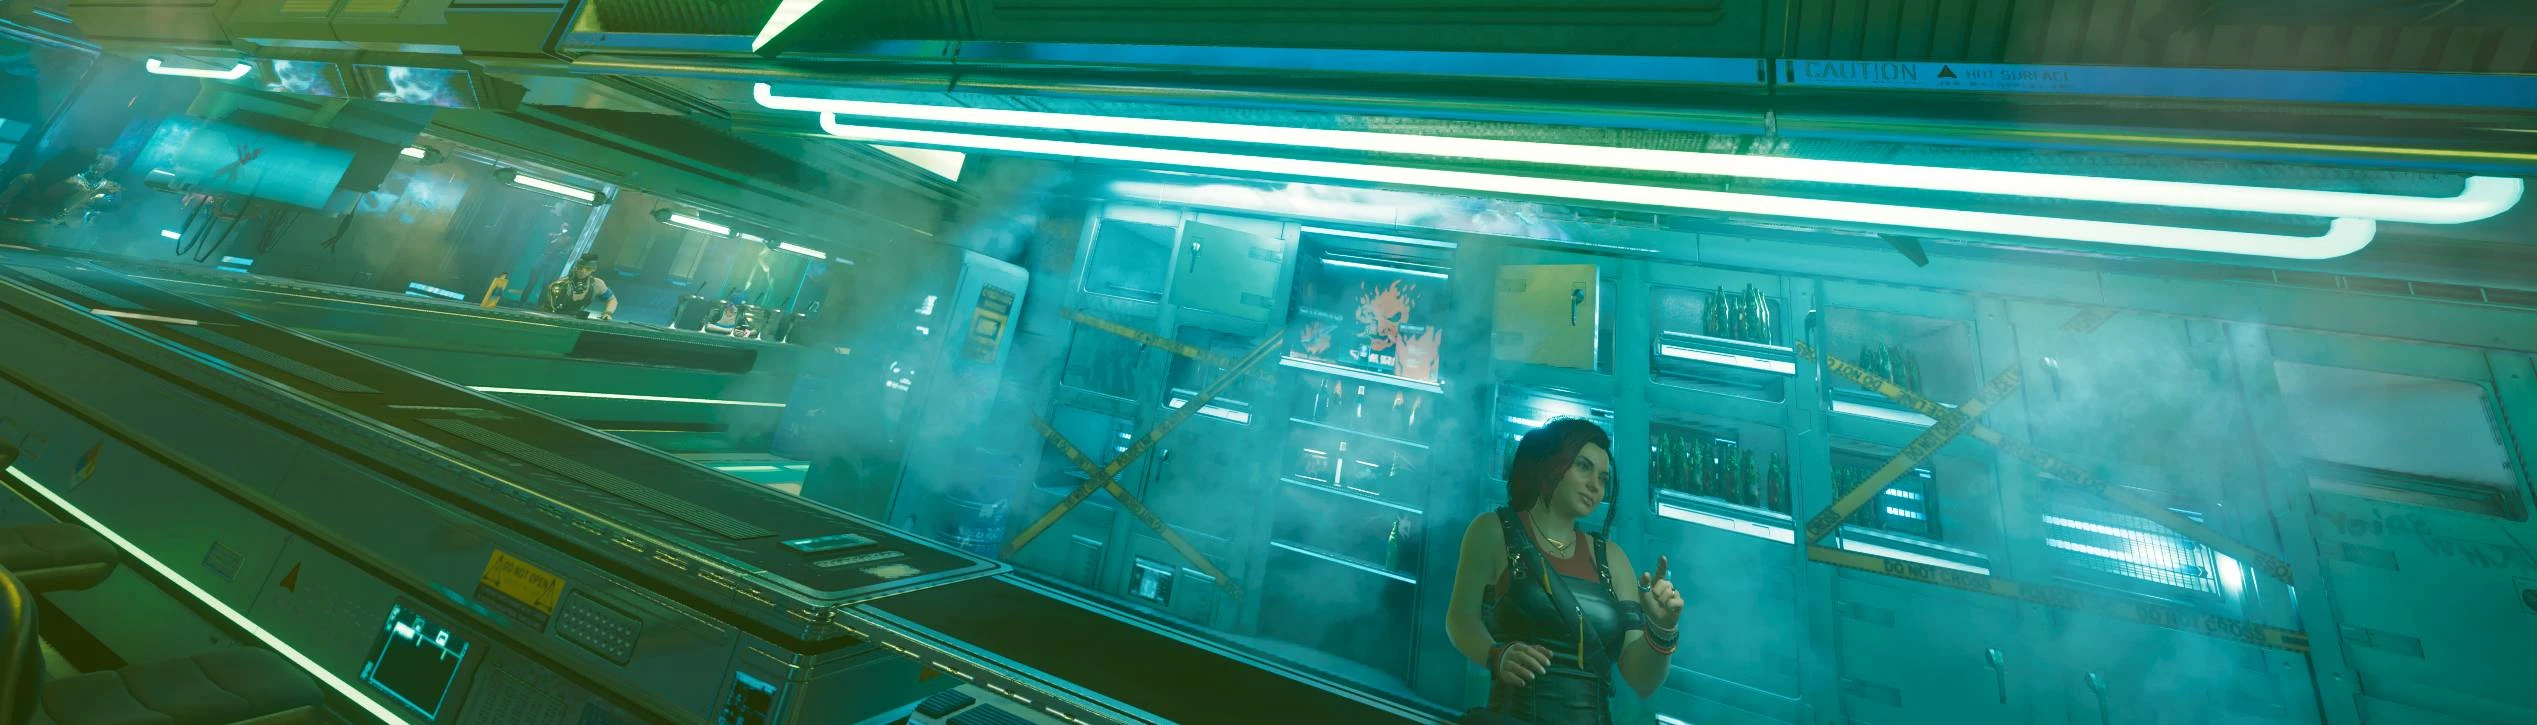 Cyberpunk 2077's fascinating afterlife